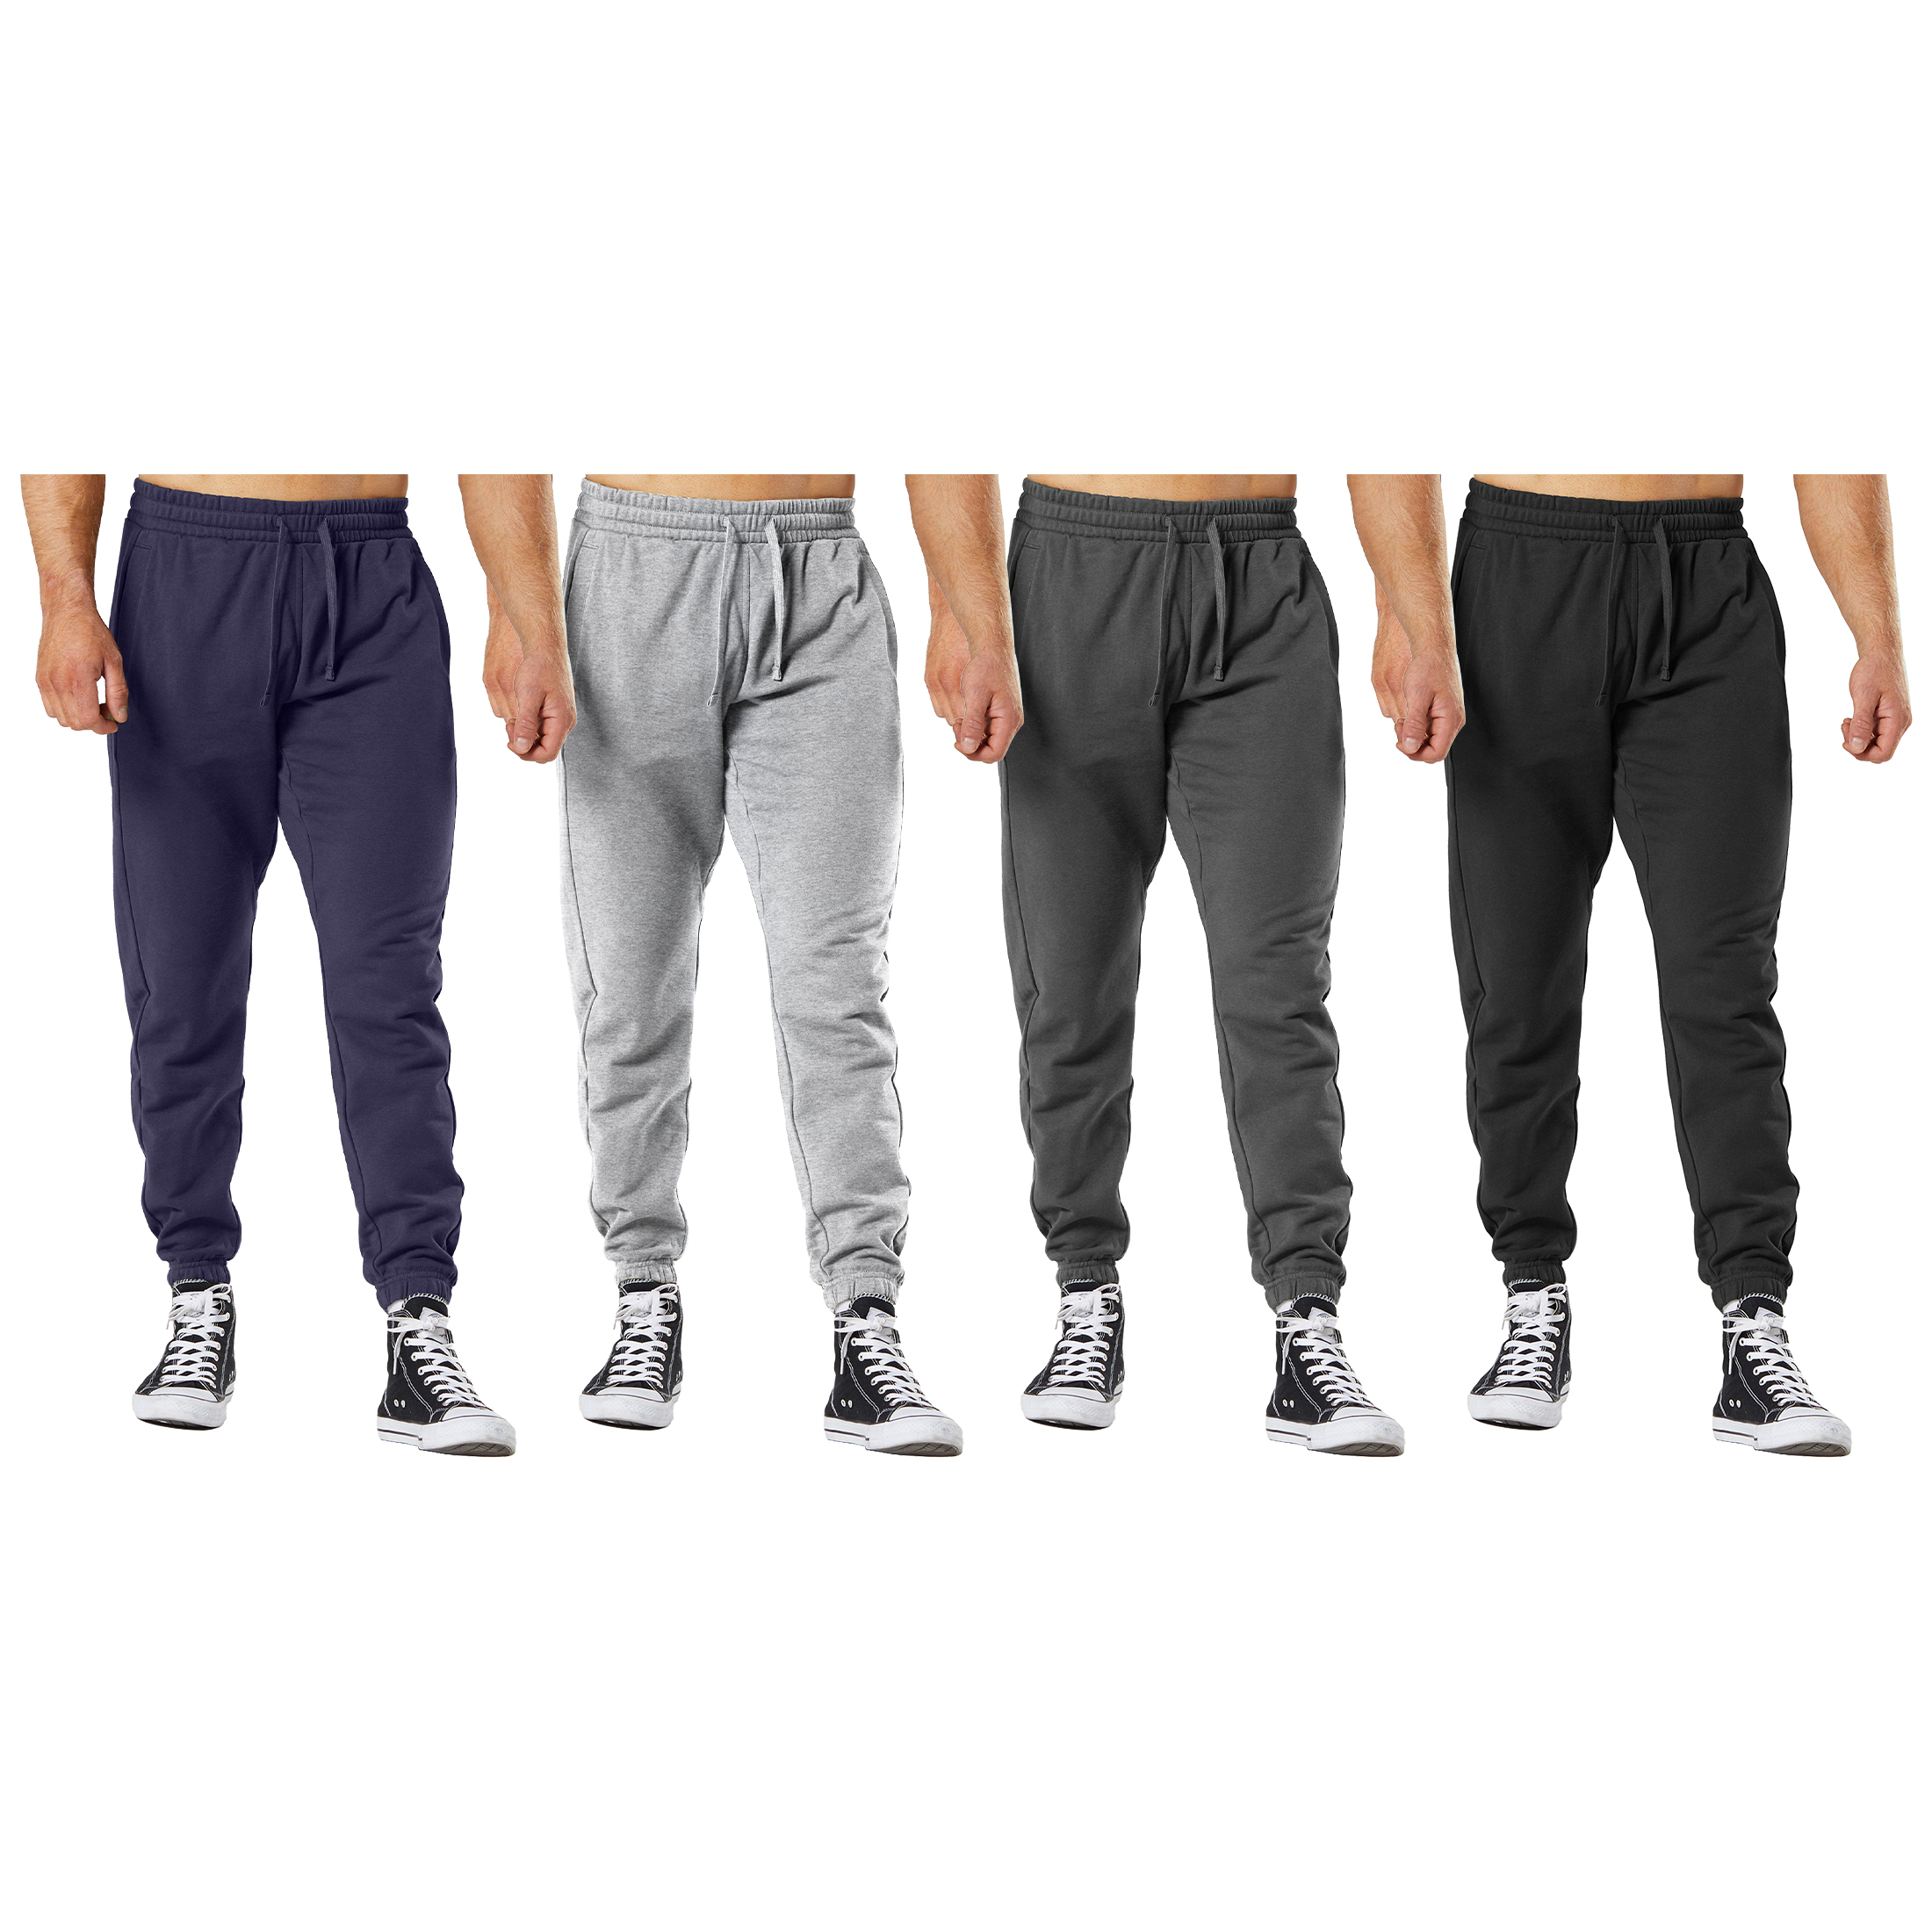 2-Pack: Men's Casual Fleece-Lined Elastic Bottom Jogger Pants With Pockets - Large